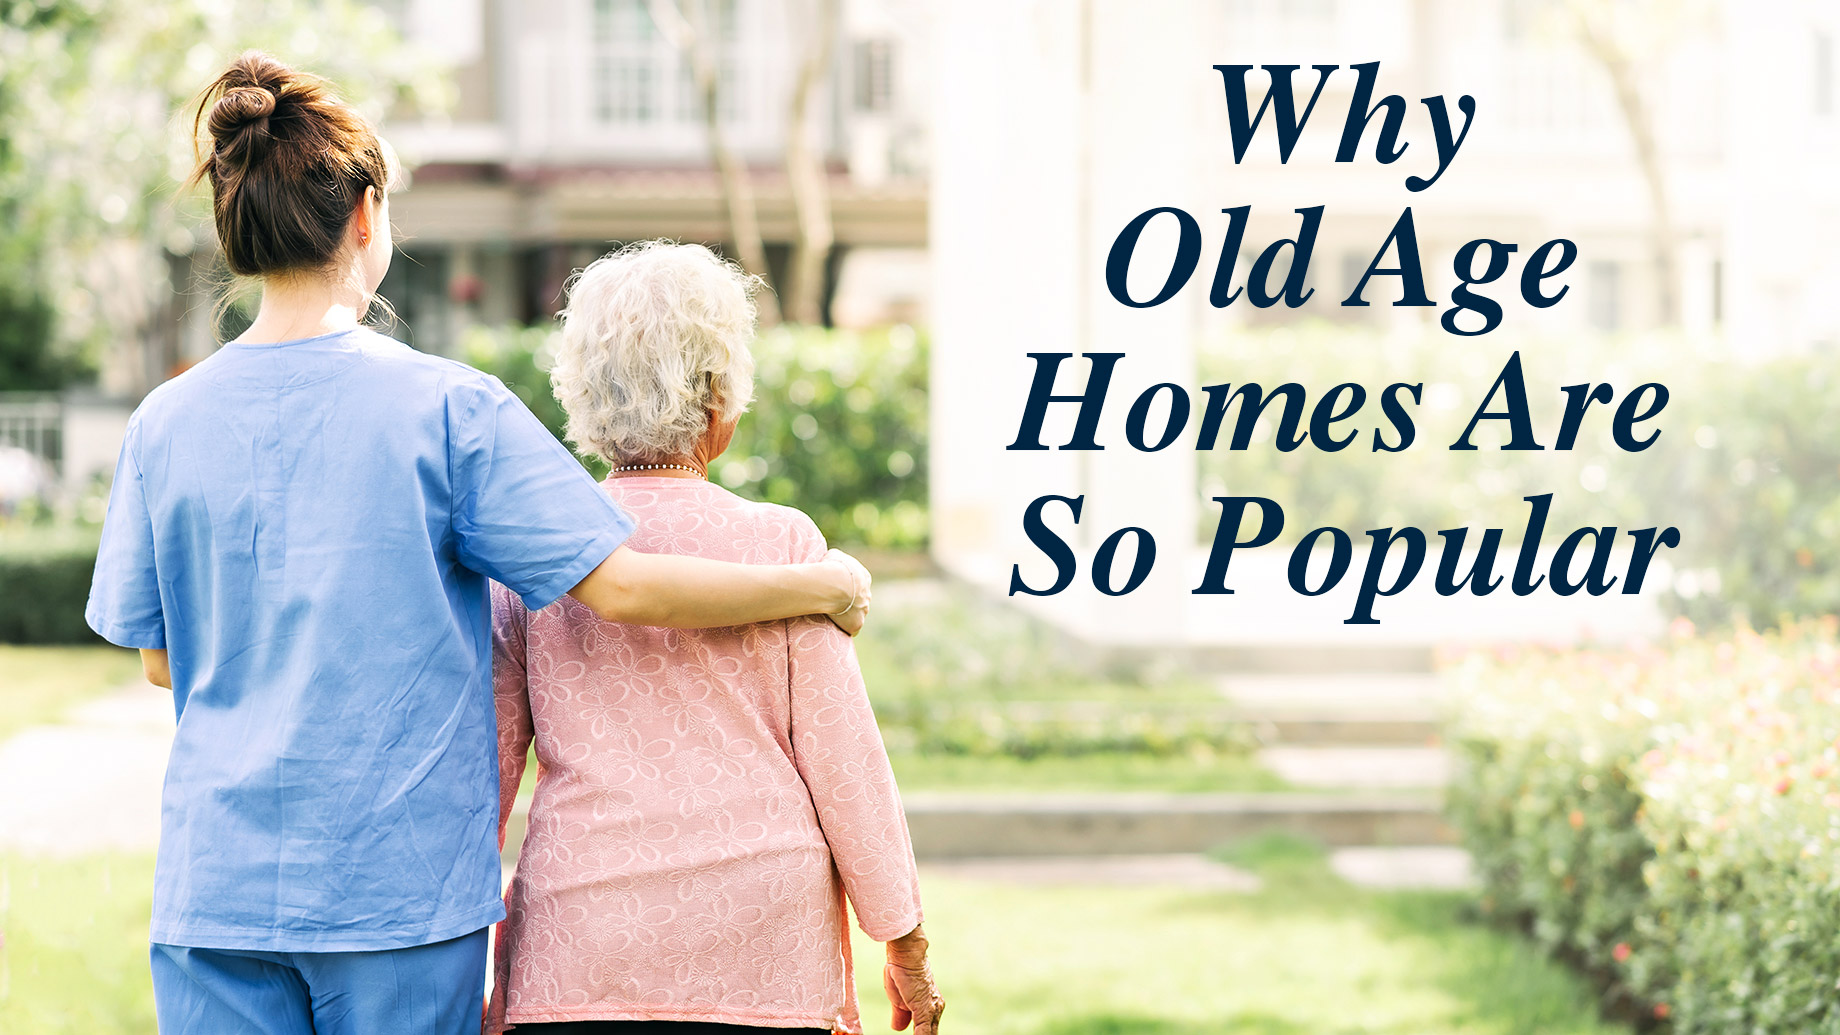 Why Old Age Homes Are So Popular